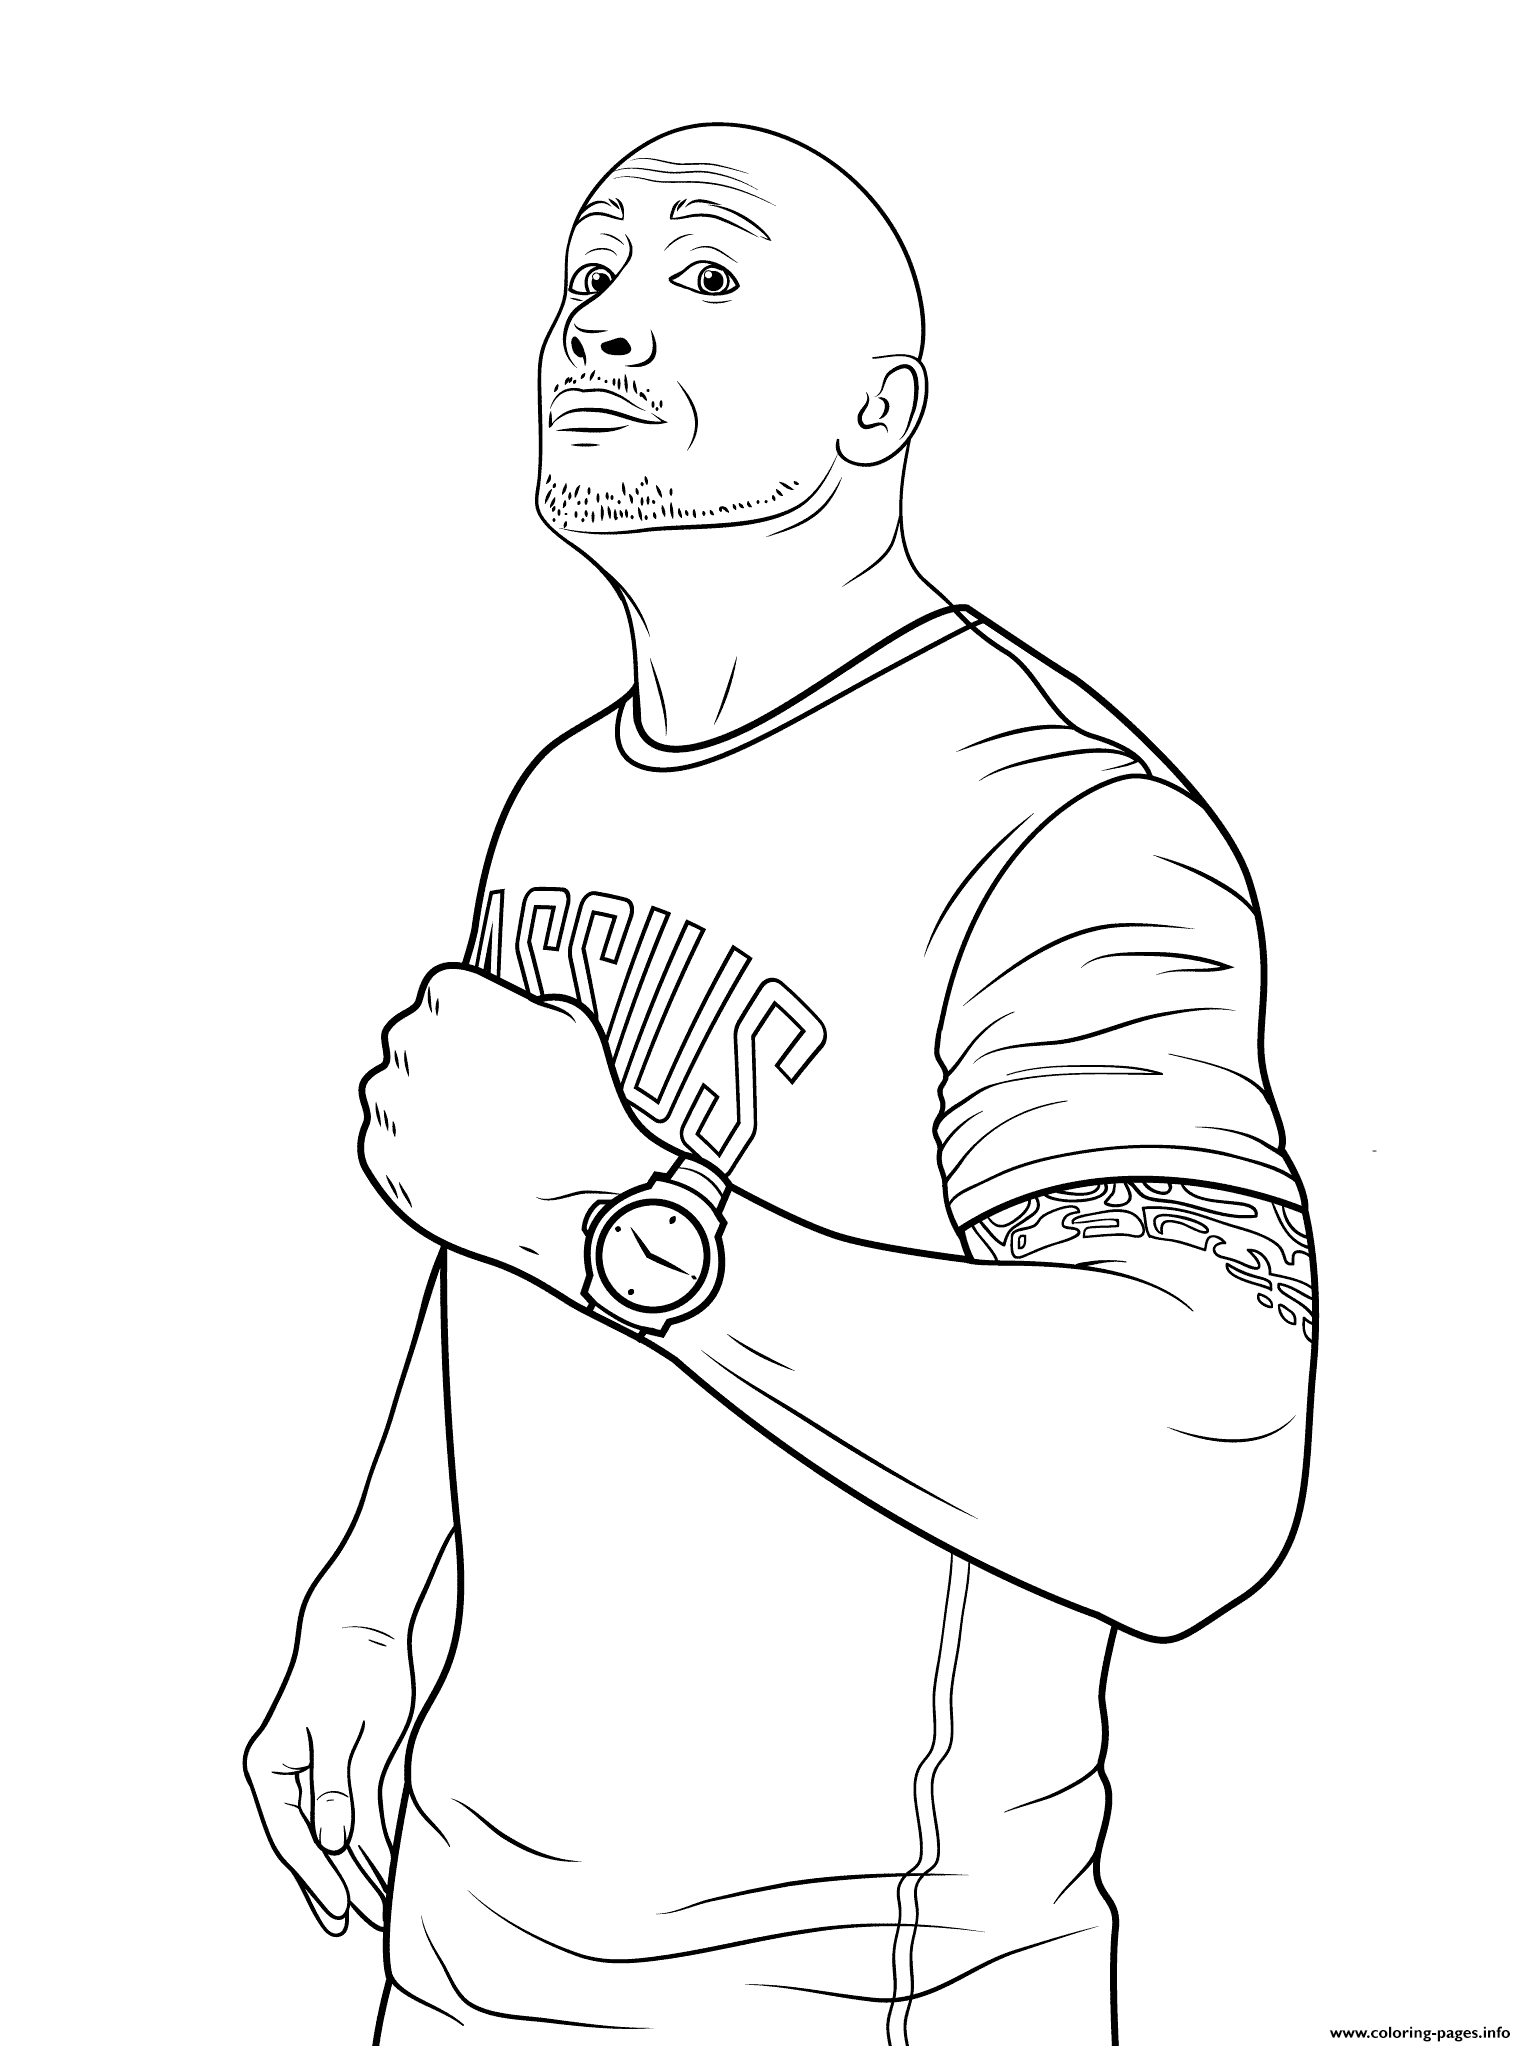 Wwe Championship Coloring Pages at GetColorings.com | Free ...